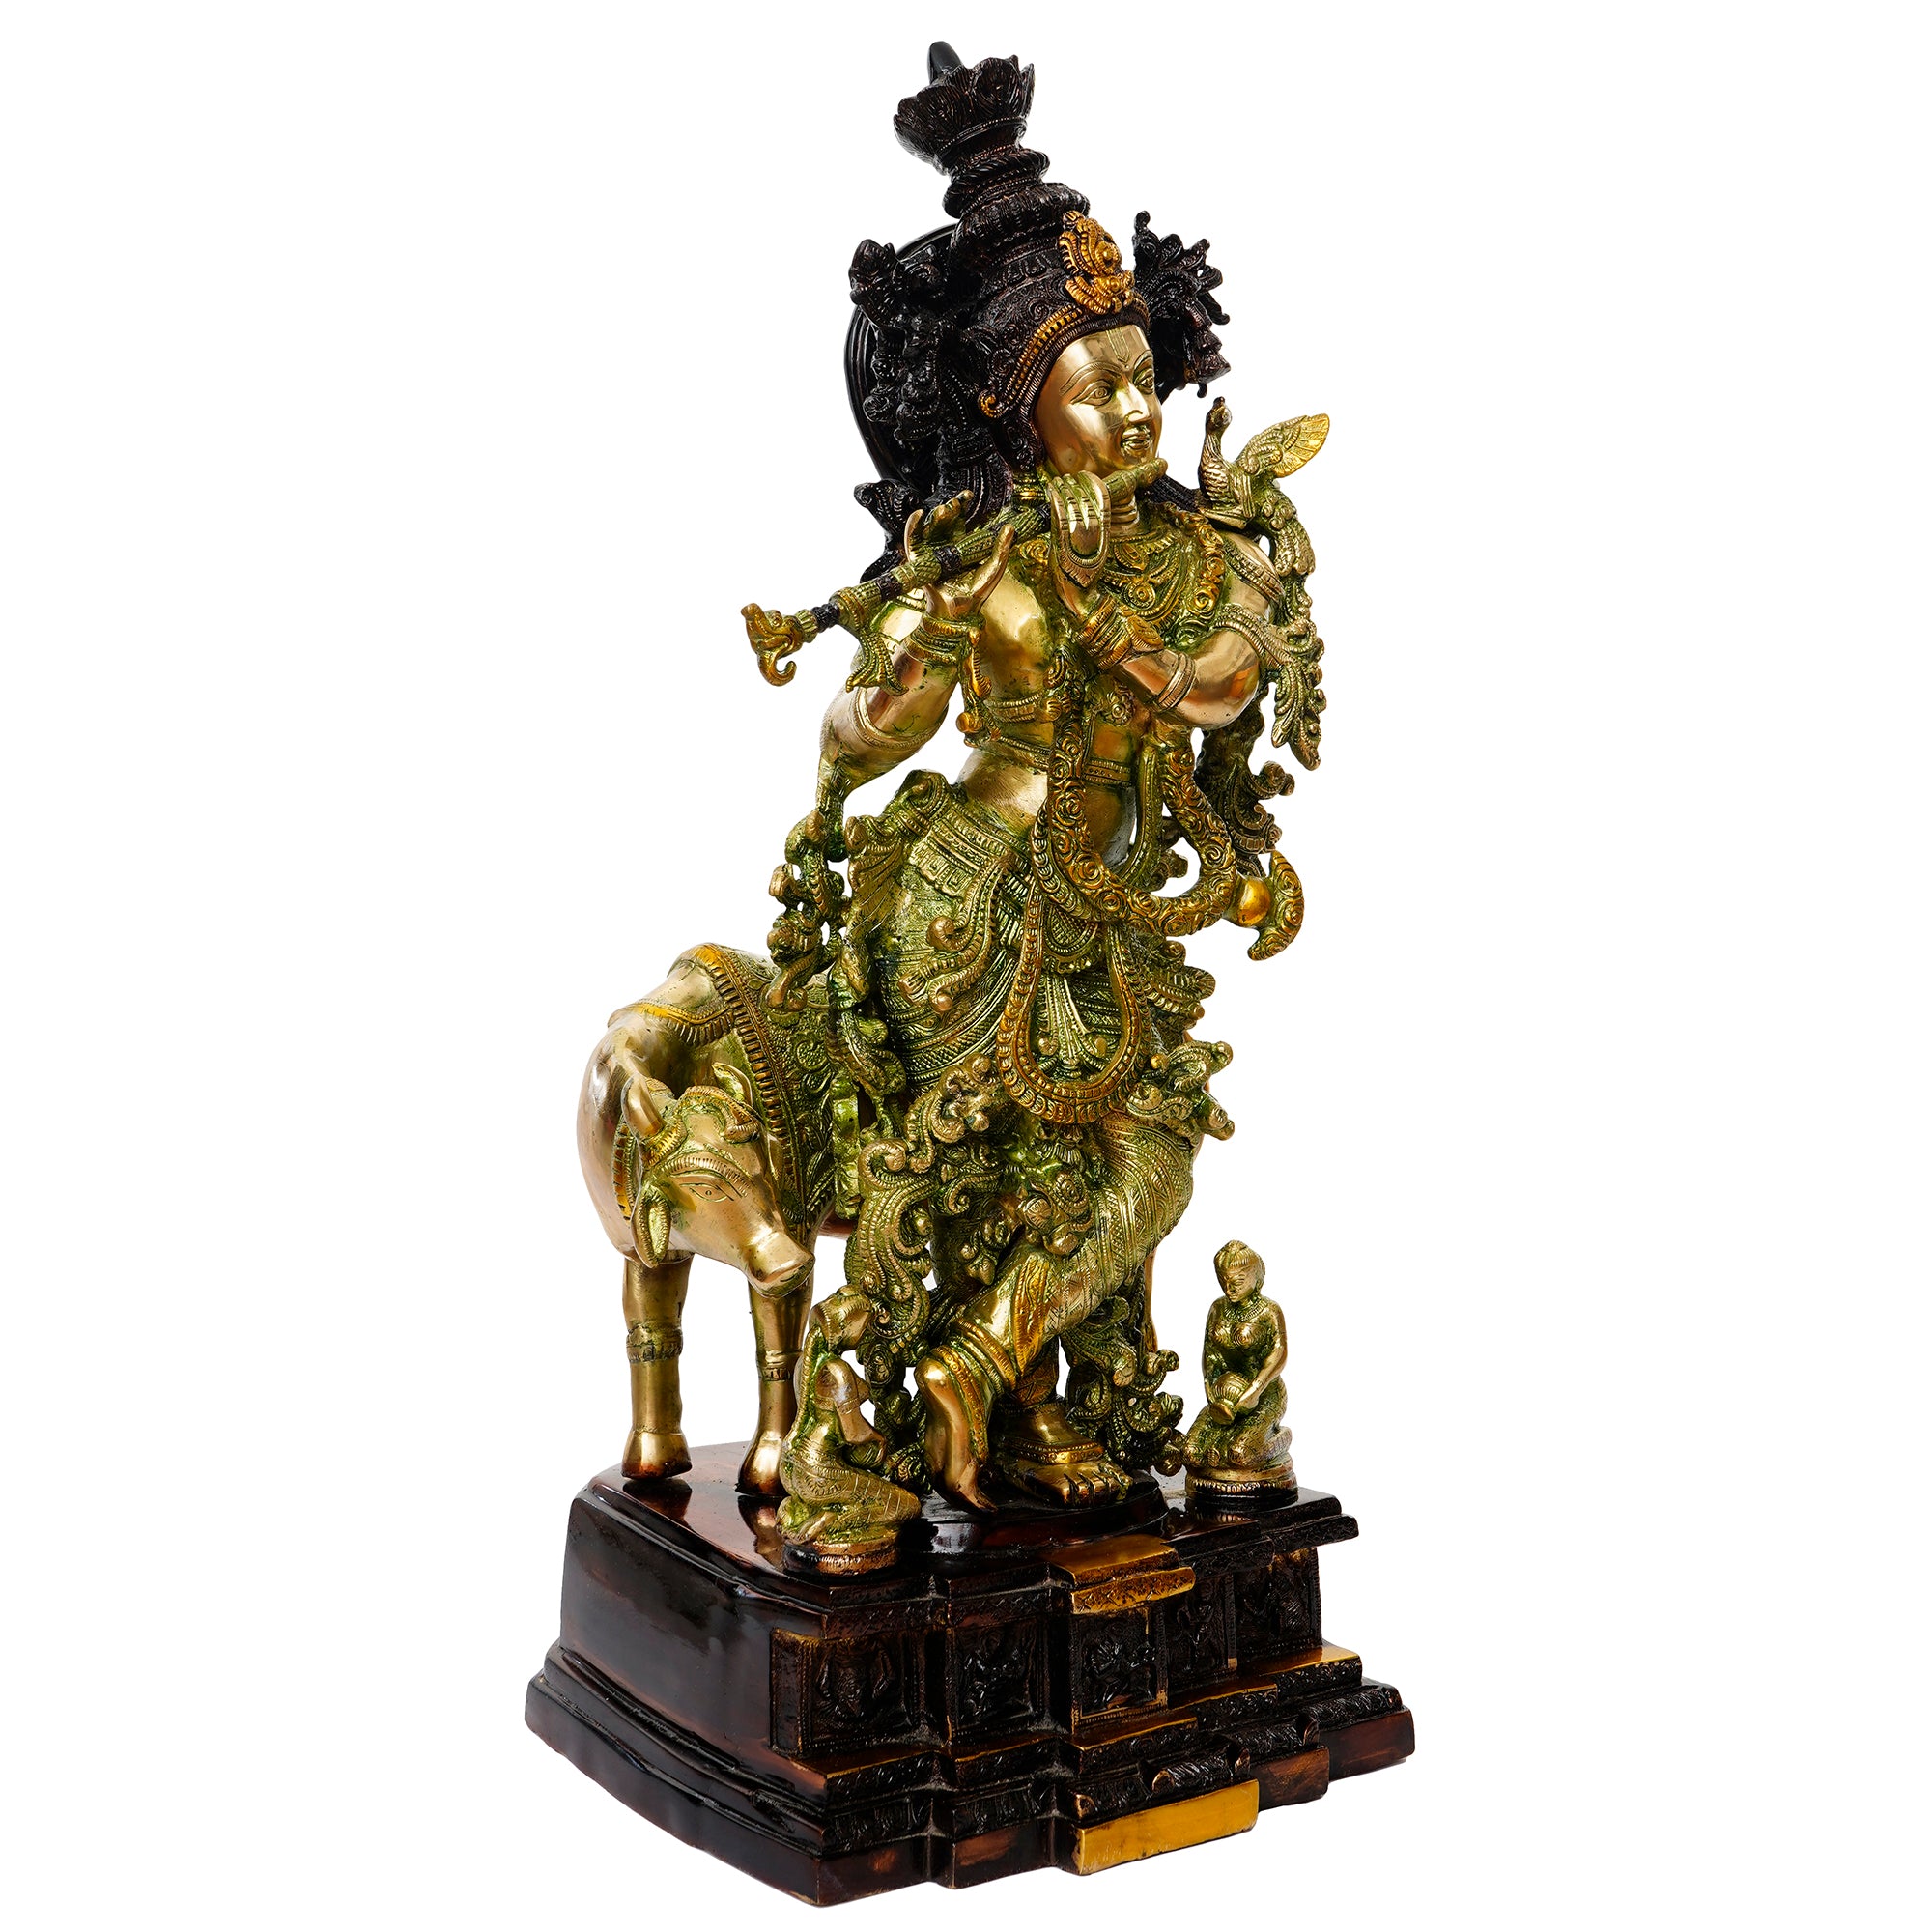 Brass Golden Handcrafted Divine Lord Krishna Sitting on Cow & Playing Flute Idol 5